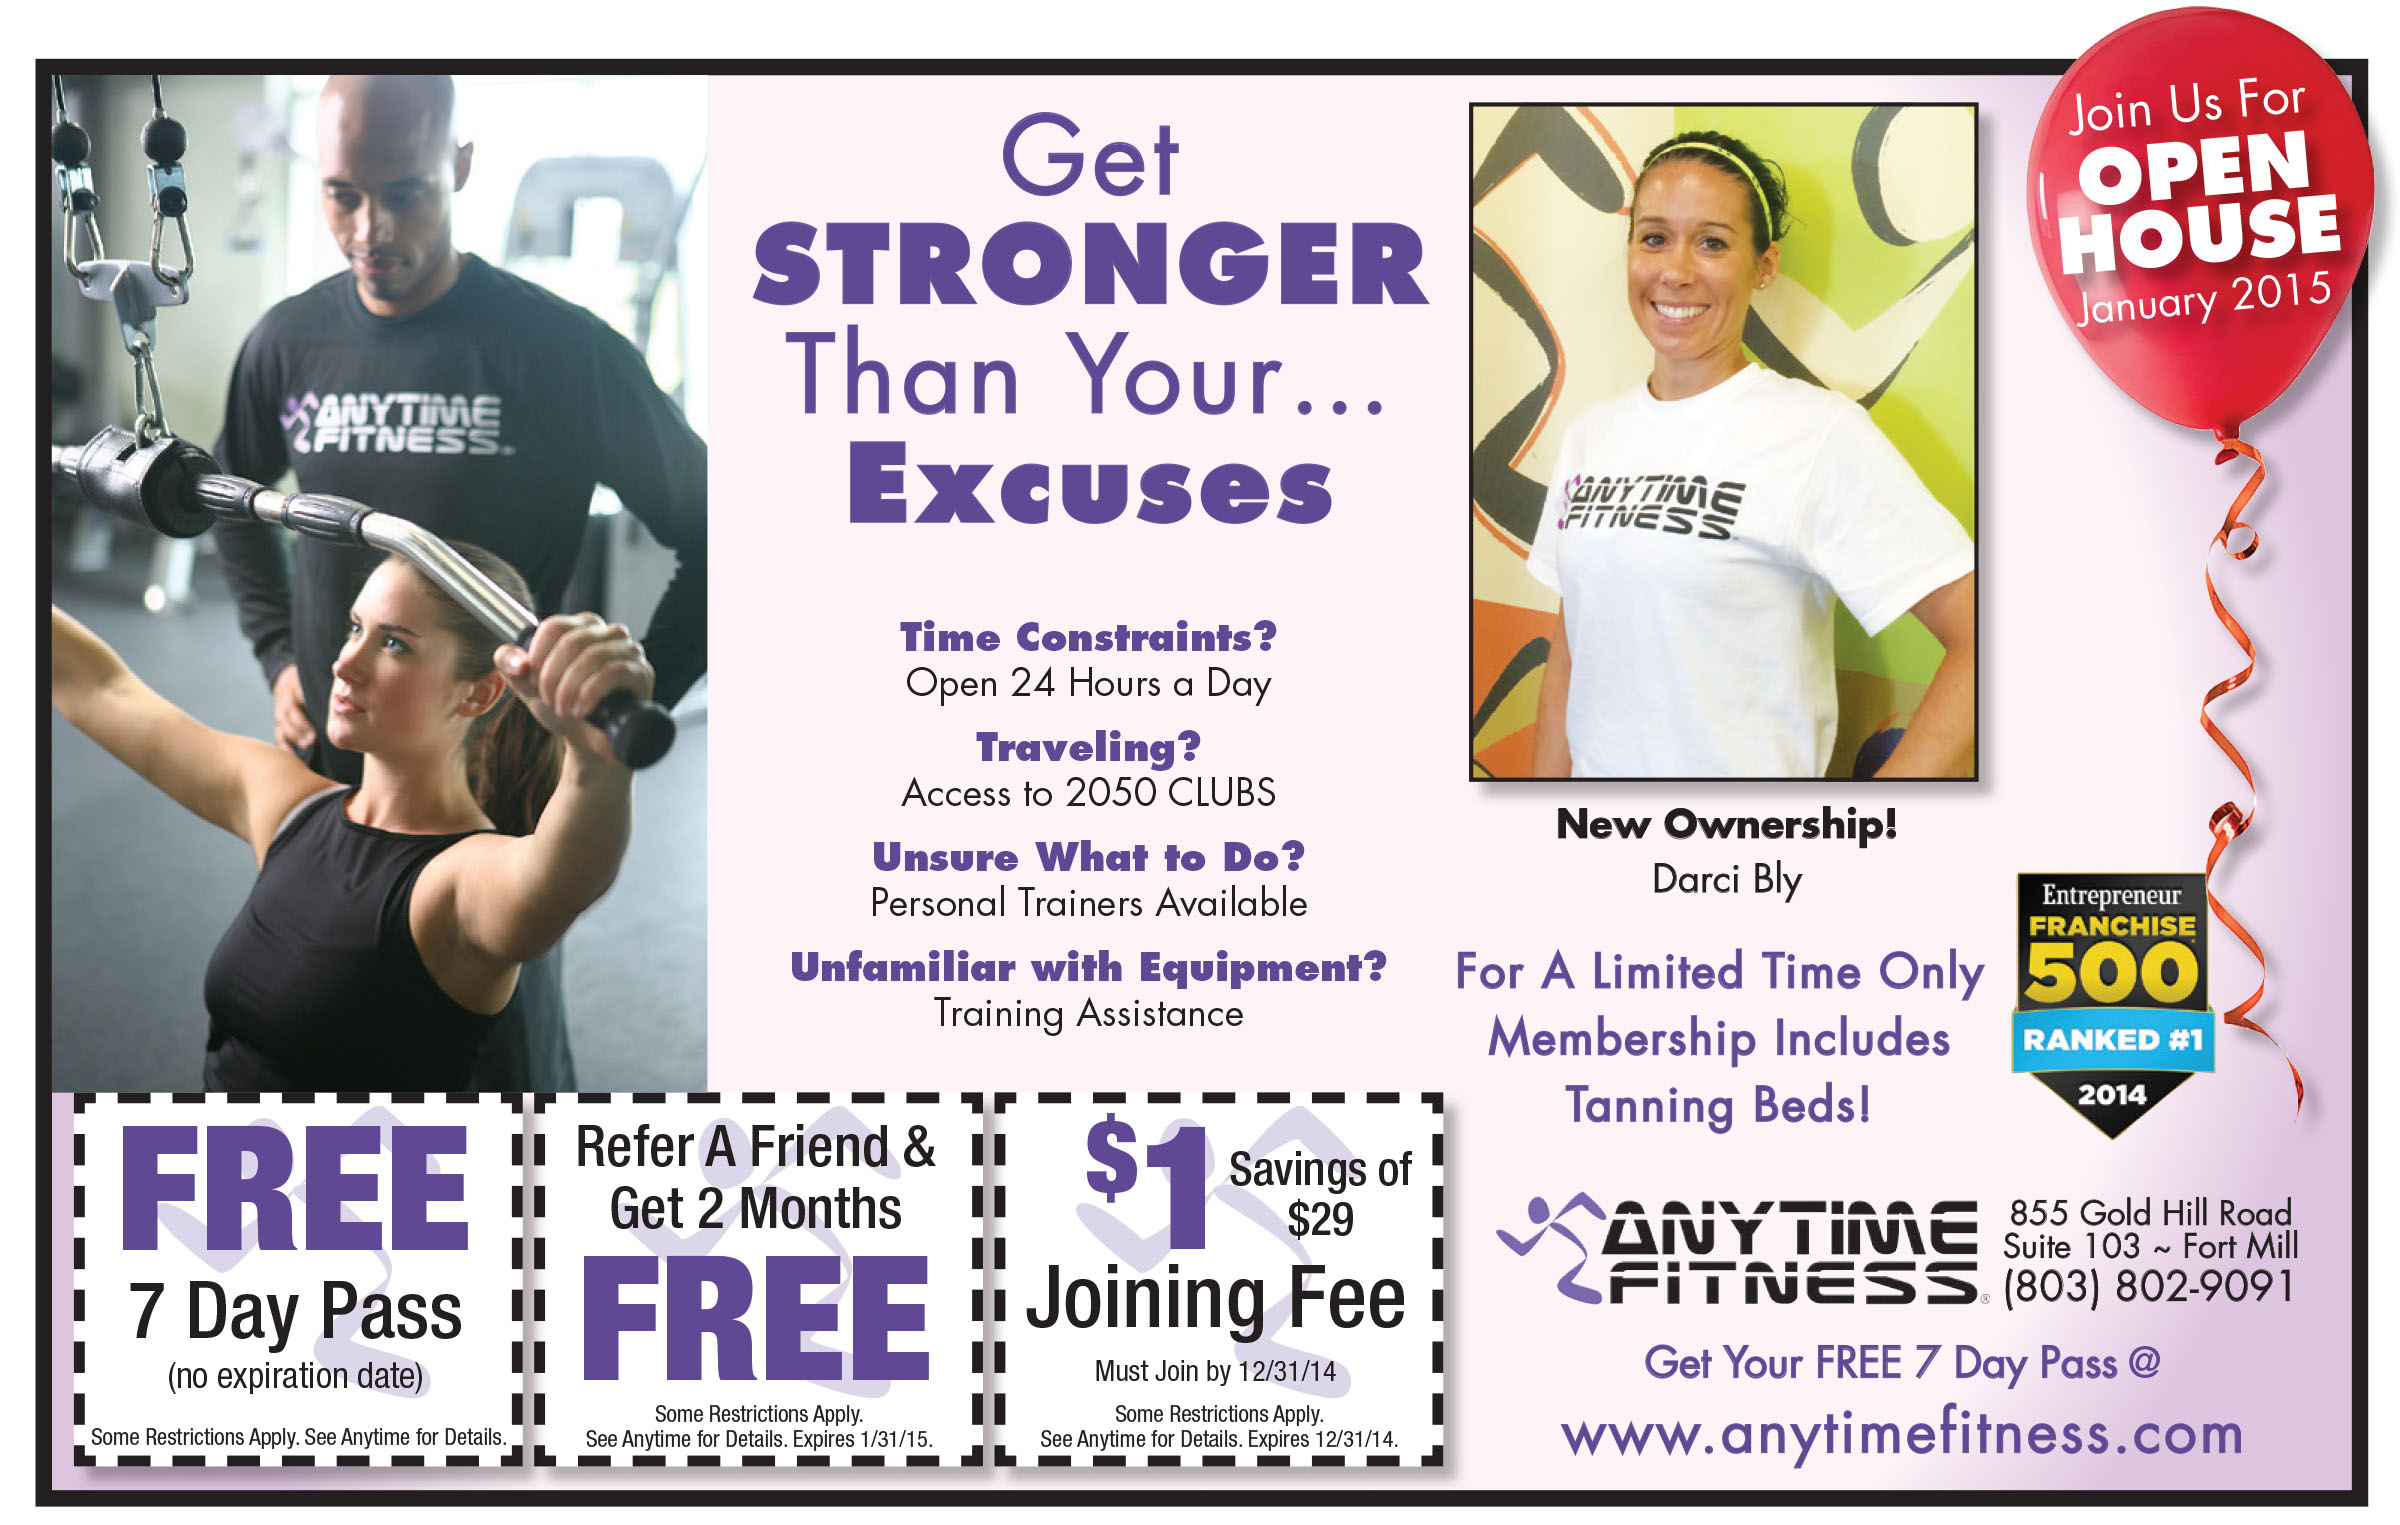  How Much Does It Cost To Get A Gym Membership At Anytime Fitness for Women